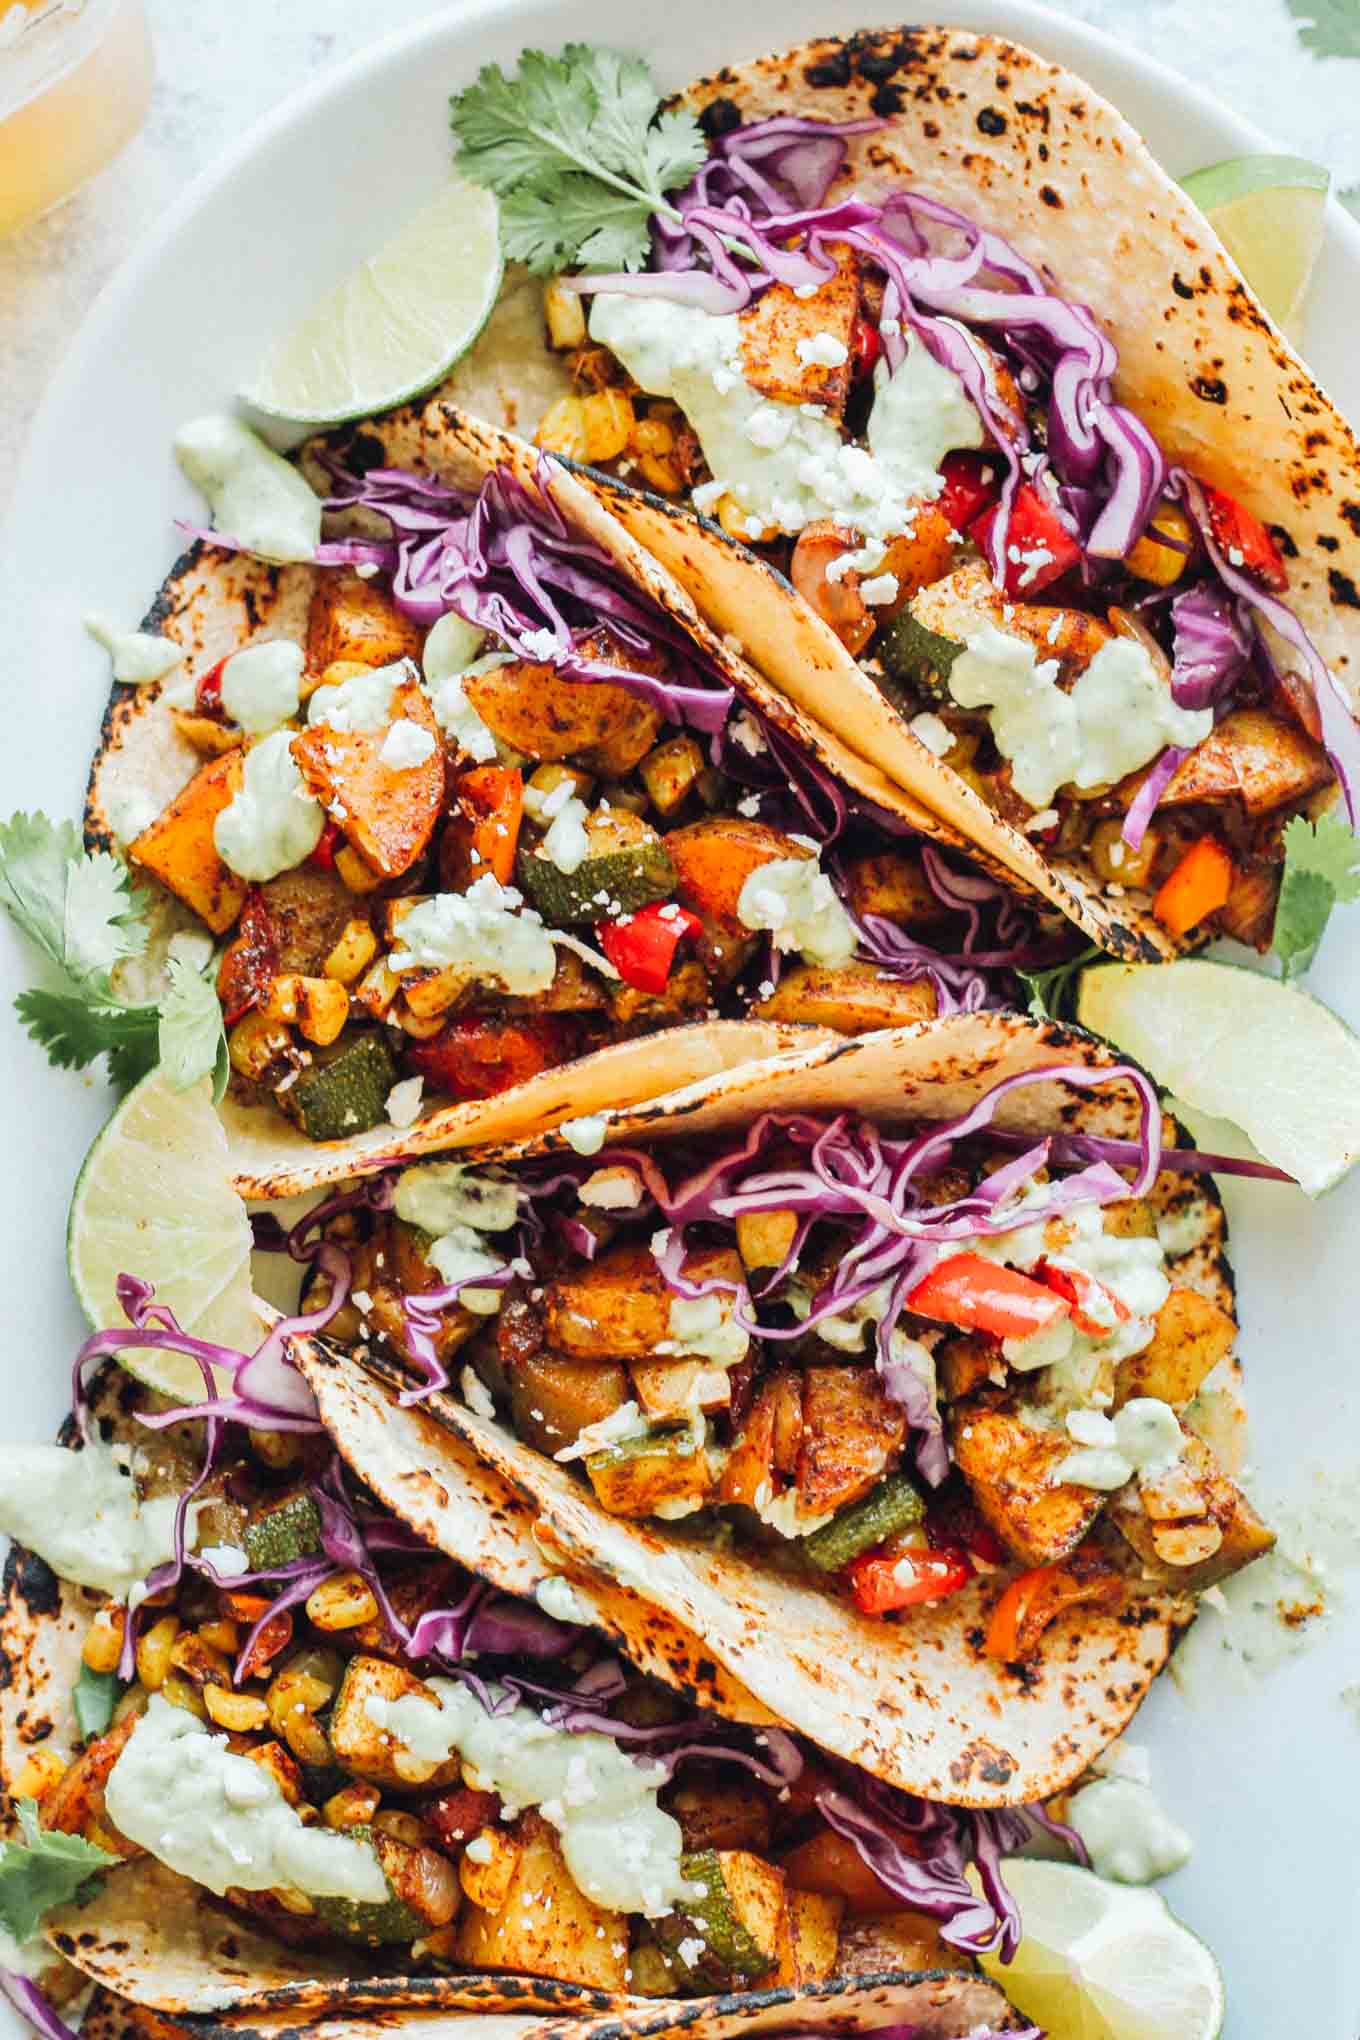 Top-down of several veggie tacos, filled with zucchini, corn, potatoes, onion, cabbage, and more